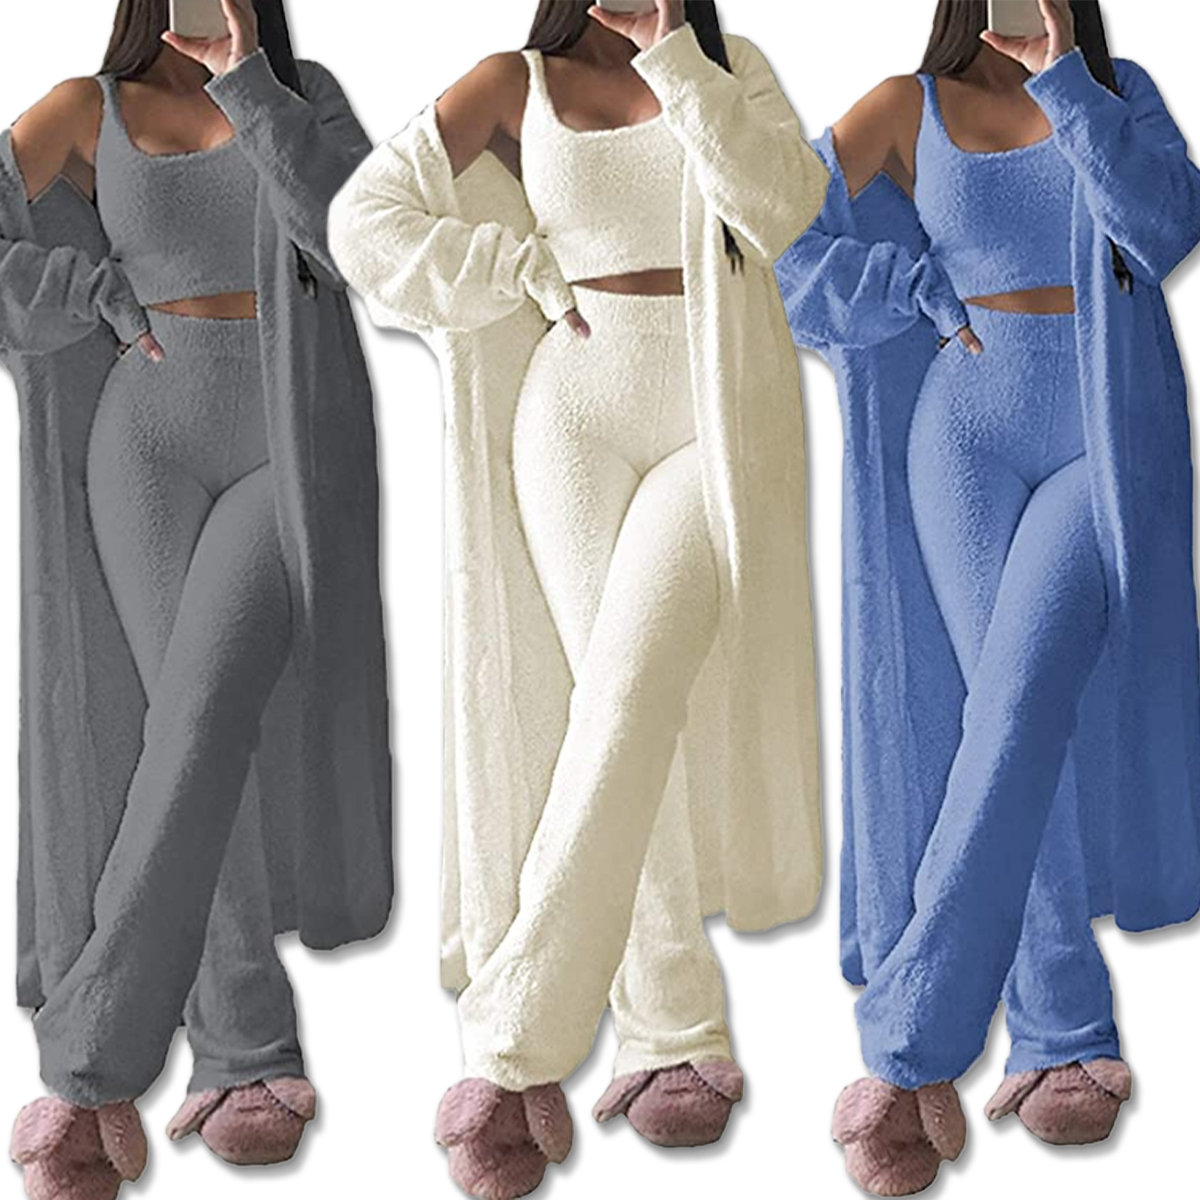 Shoppers Love This $50 Fuzzy 3-Piece Loungewear Set